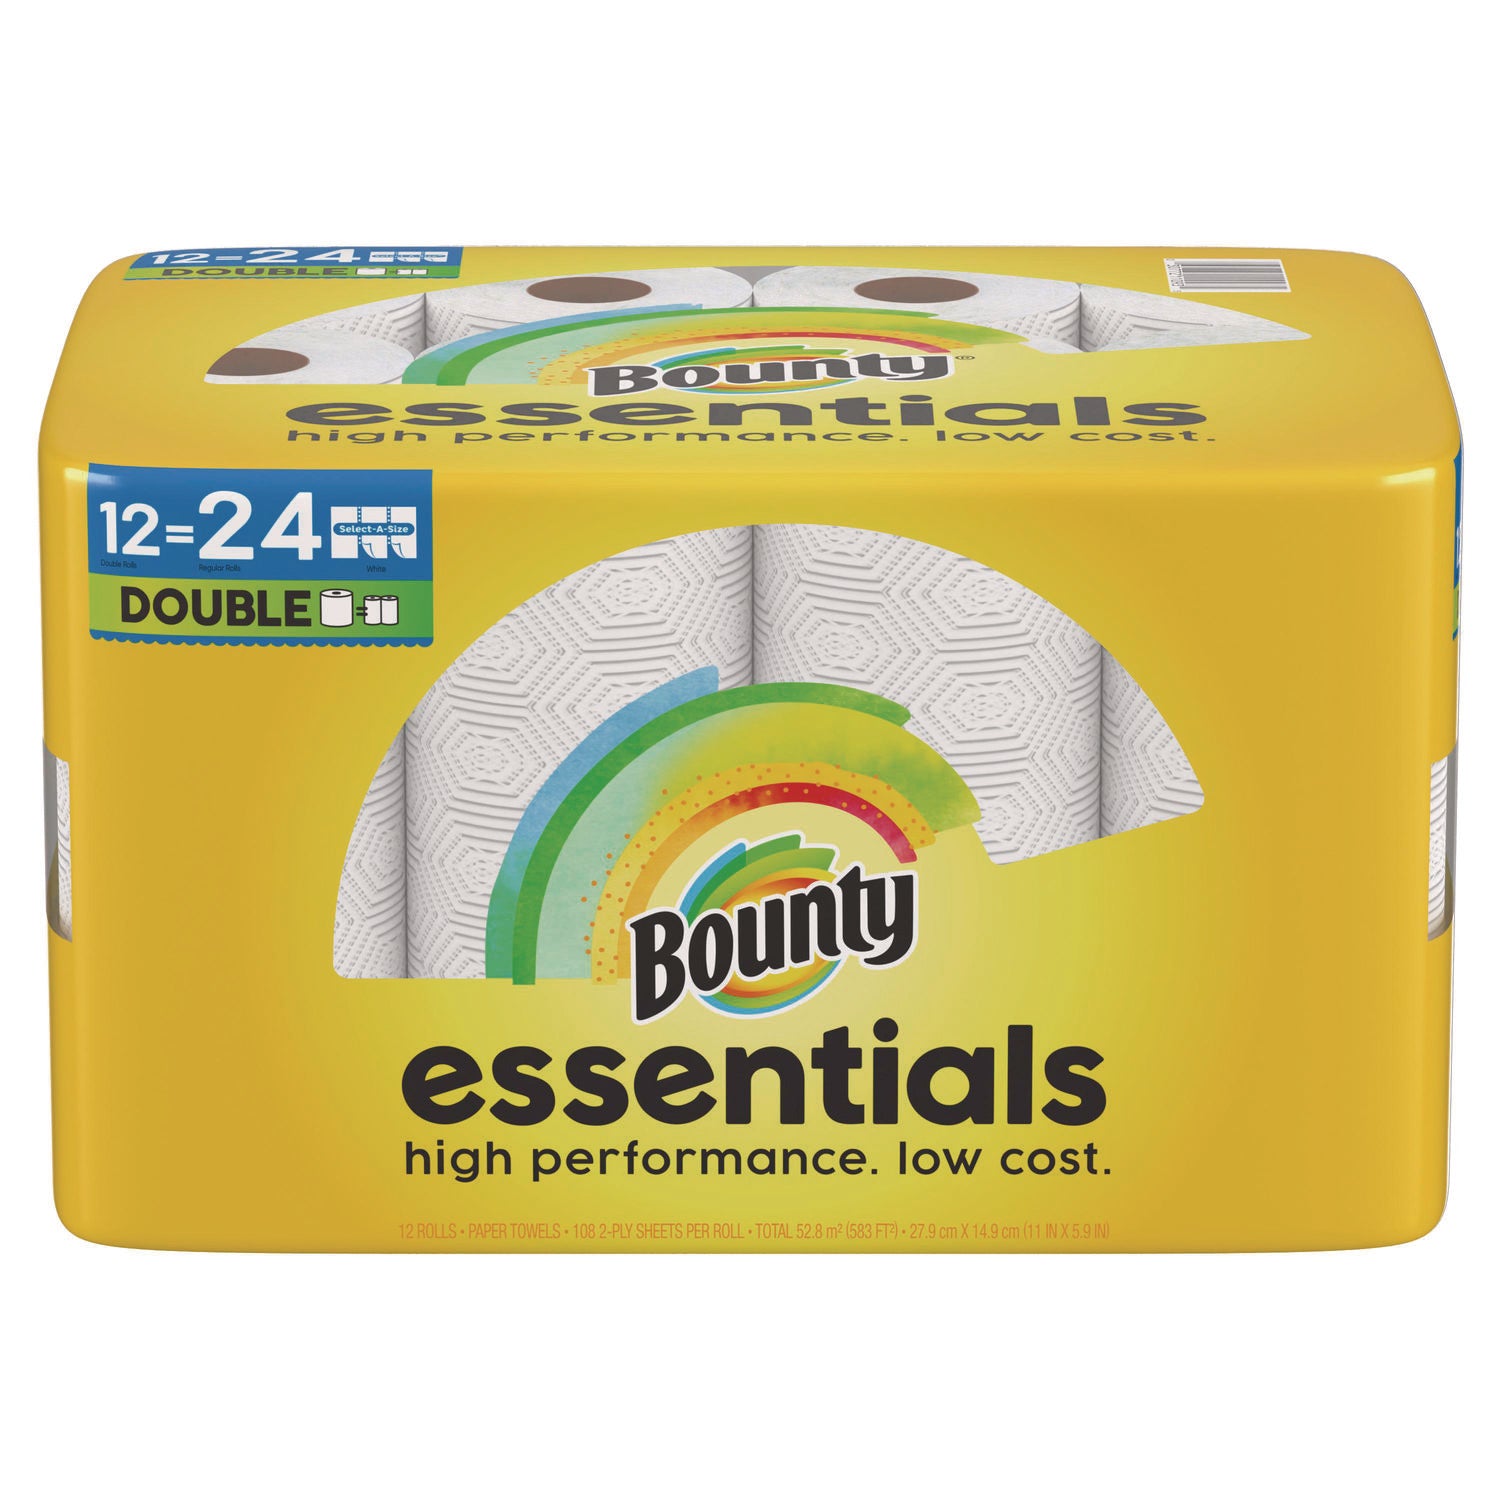 essentials-select-a-size-kitchen-roll-paper-towels-2-ply-108-sheets-roll-12-rolls-carton_pgc11093 - 2